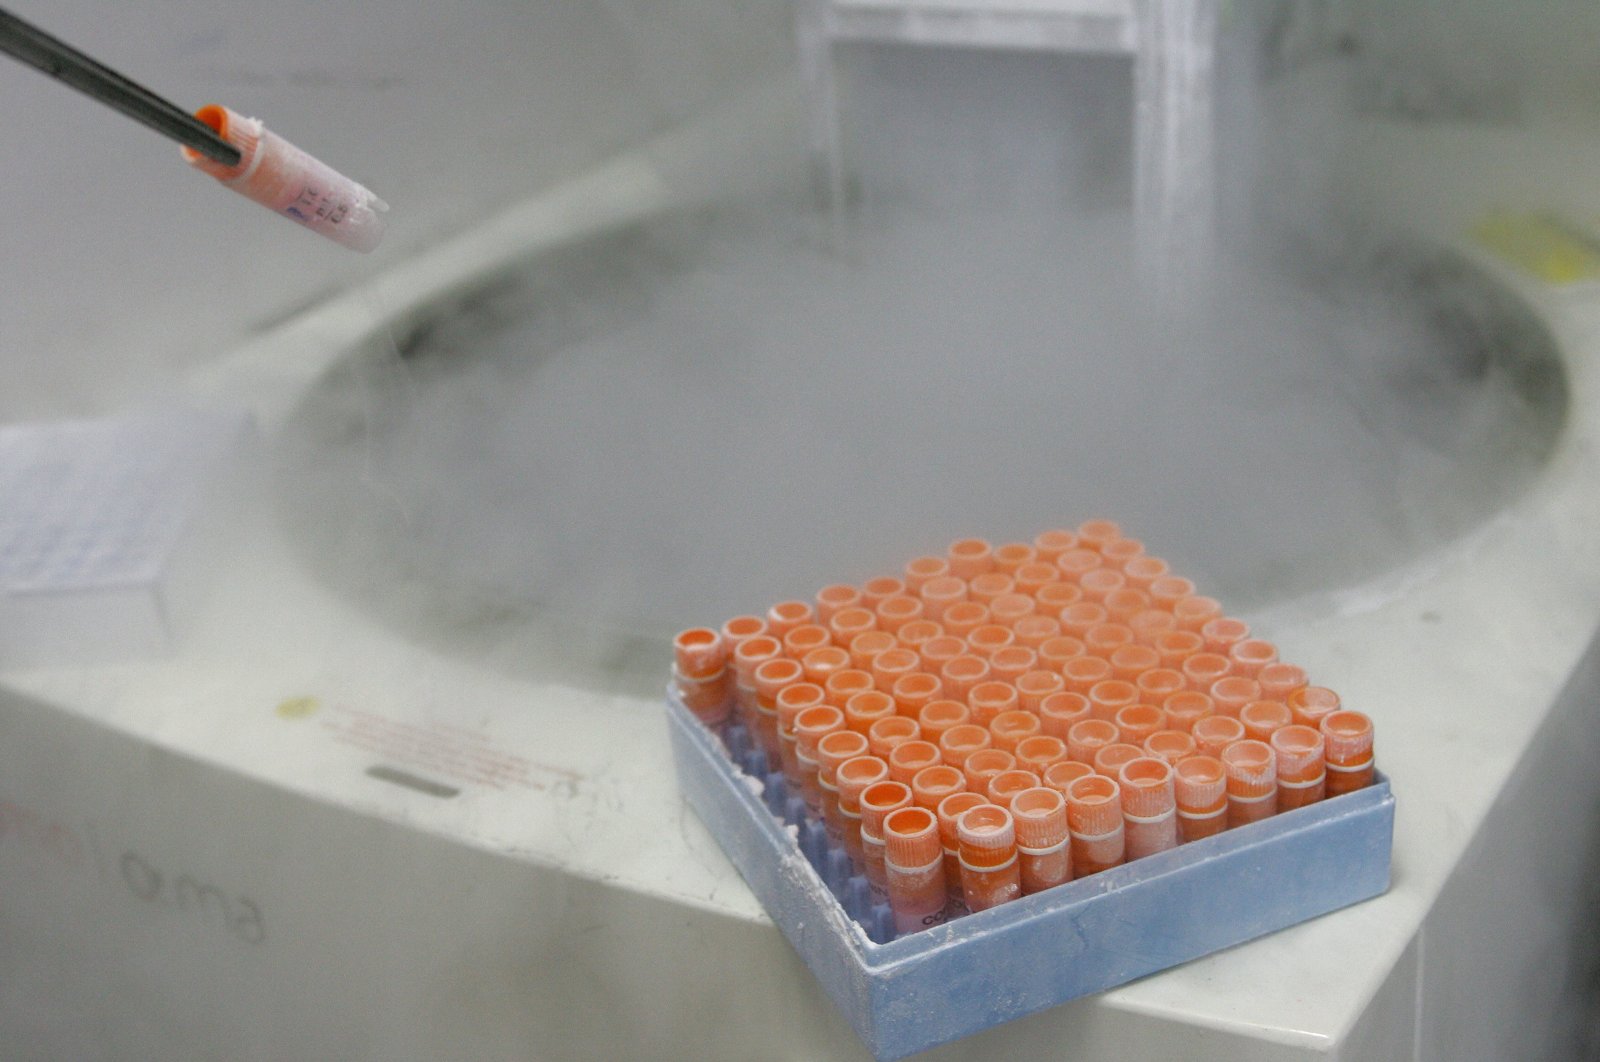 A scientific researcher handles frozen embryonic stem cells in a laboratory, in Sao Paulo, Brazil, March 4, 2008. (AFP Photo)